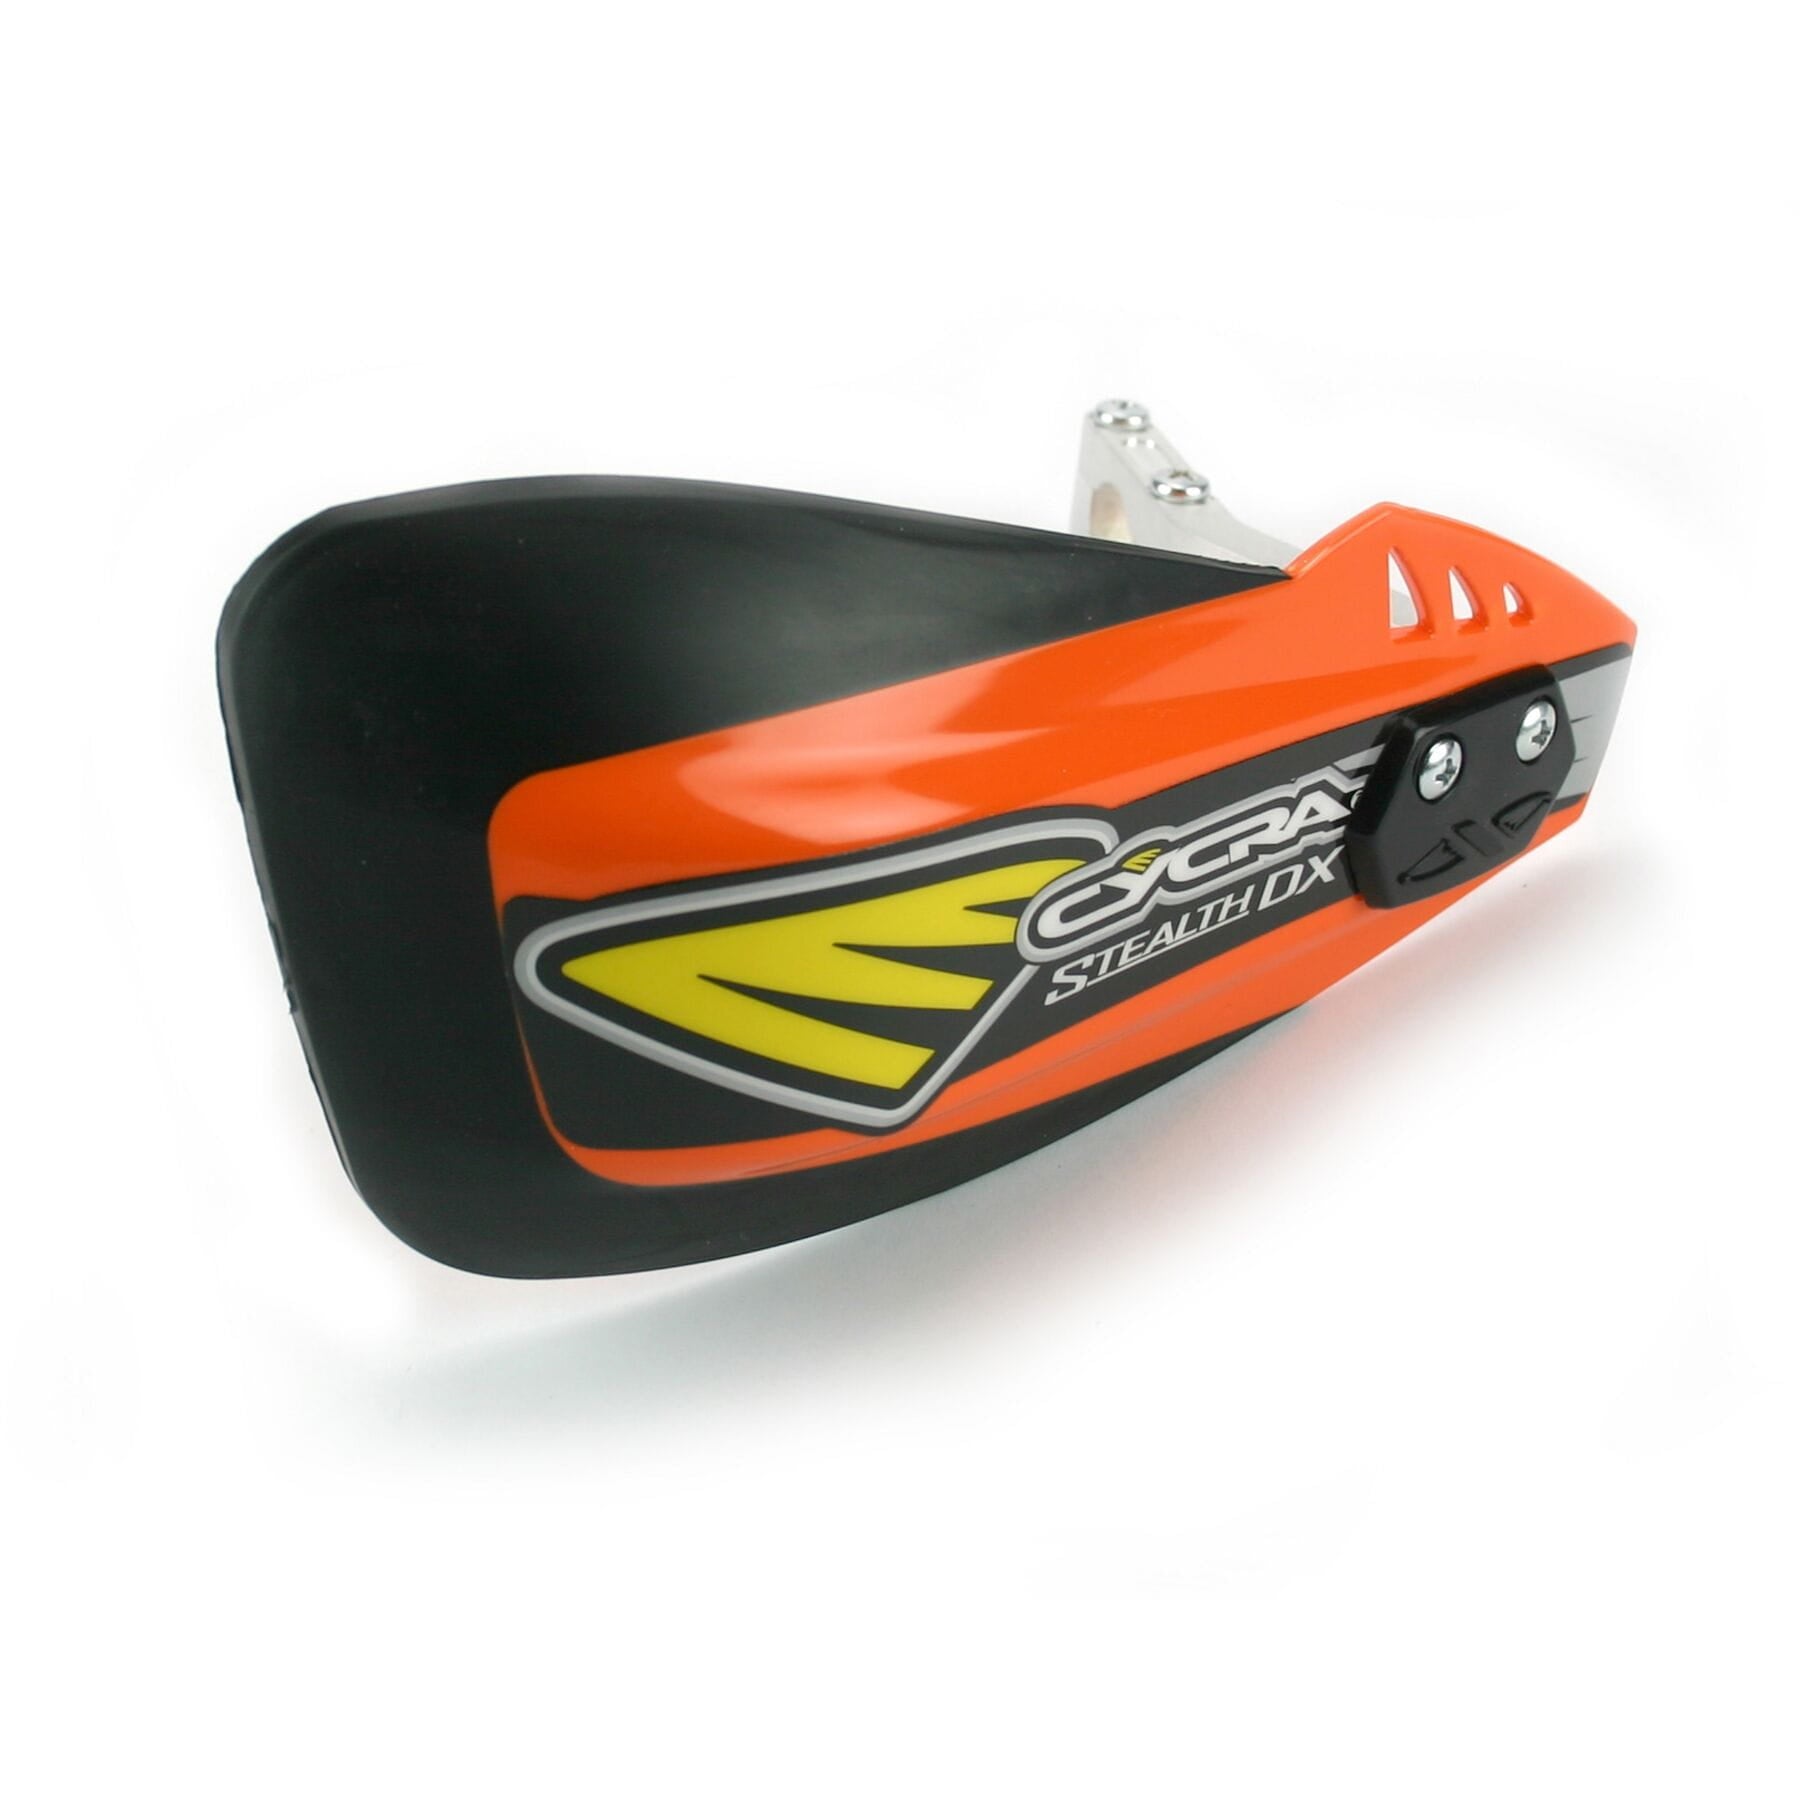 Stealth DX Handguard in vibrant orange mounted on a modern motorcycle